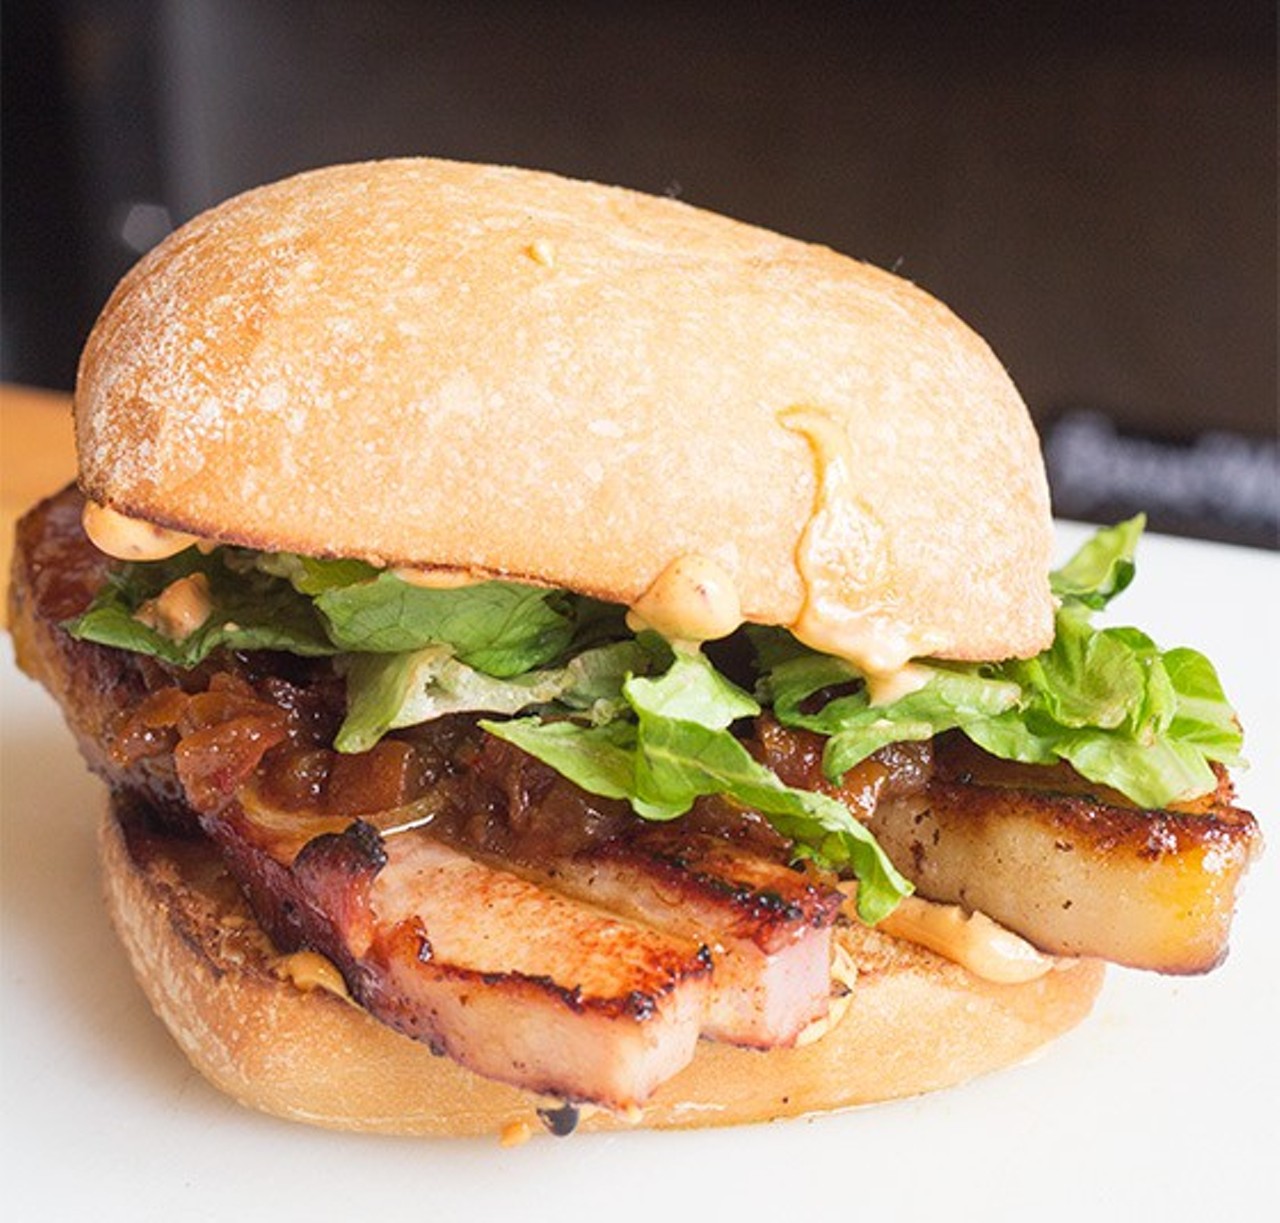 Who says you can't have a sandwich for your first meal of the day? The pork-belly BLT sandwich is just one delicious option on the brunch menu. Photo by Mabel Suen.